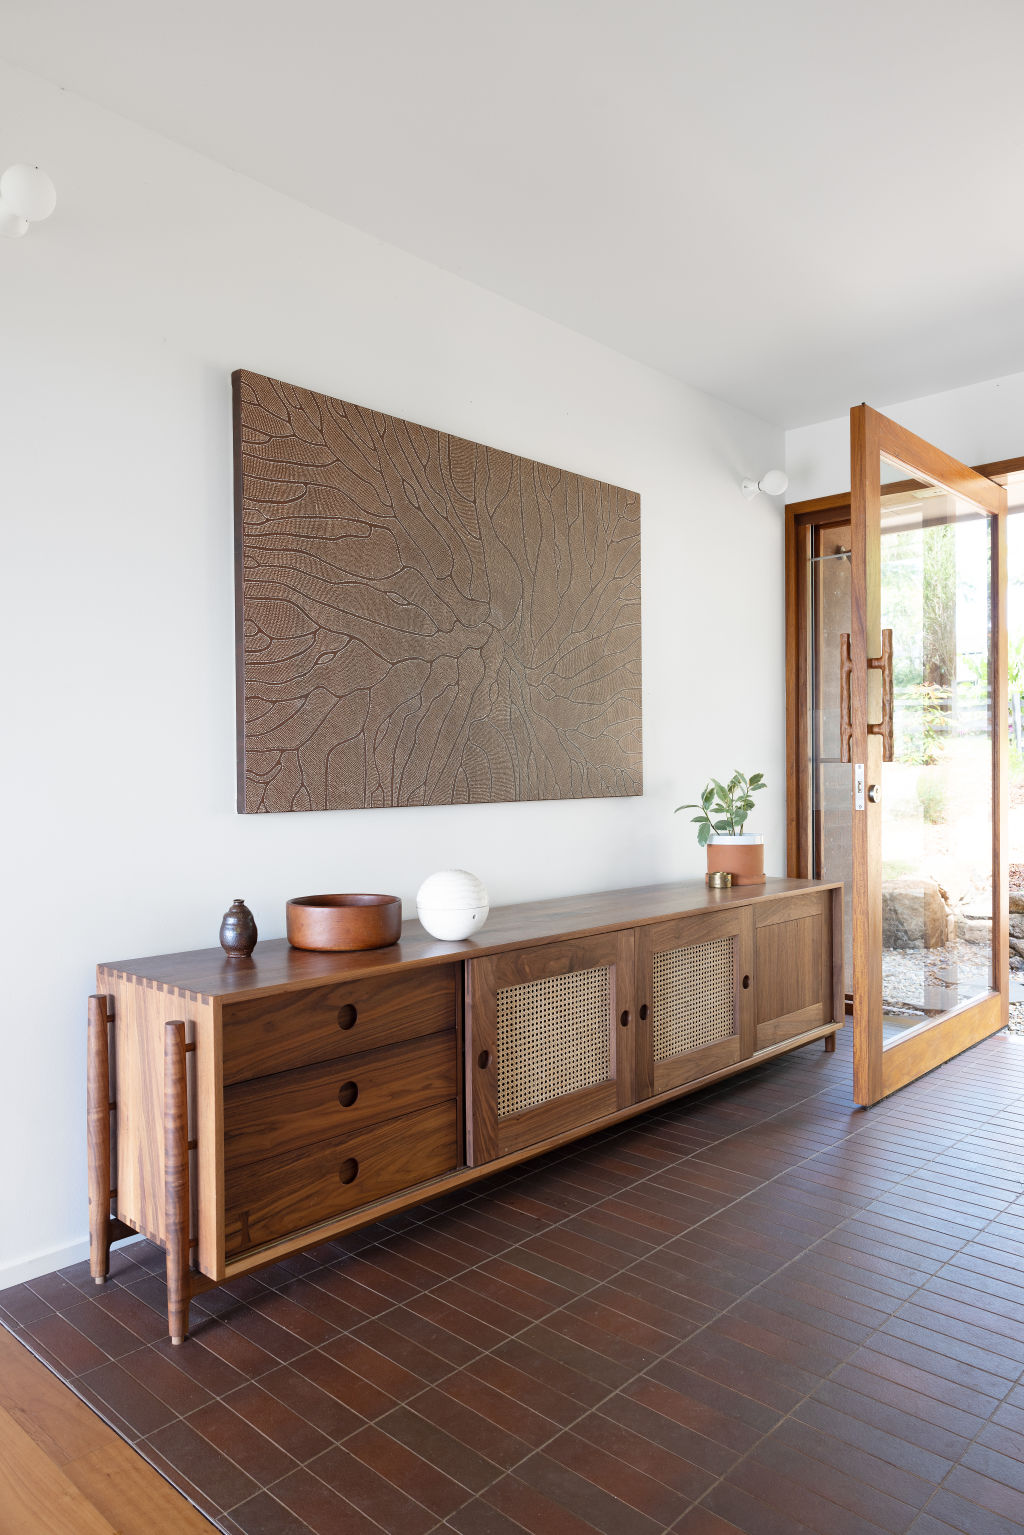 All of Lee's furniture naturally works within the home. Photo: Louise Roche